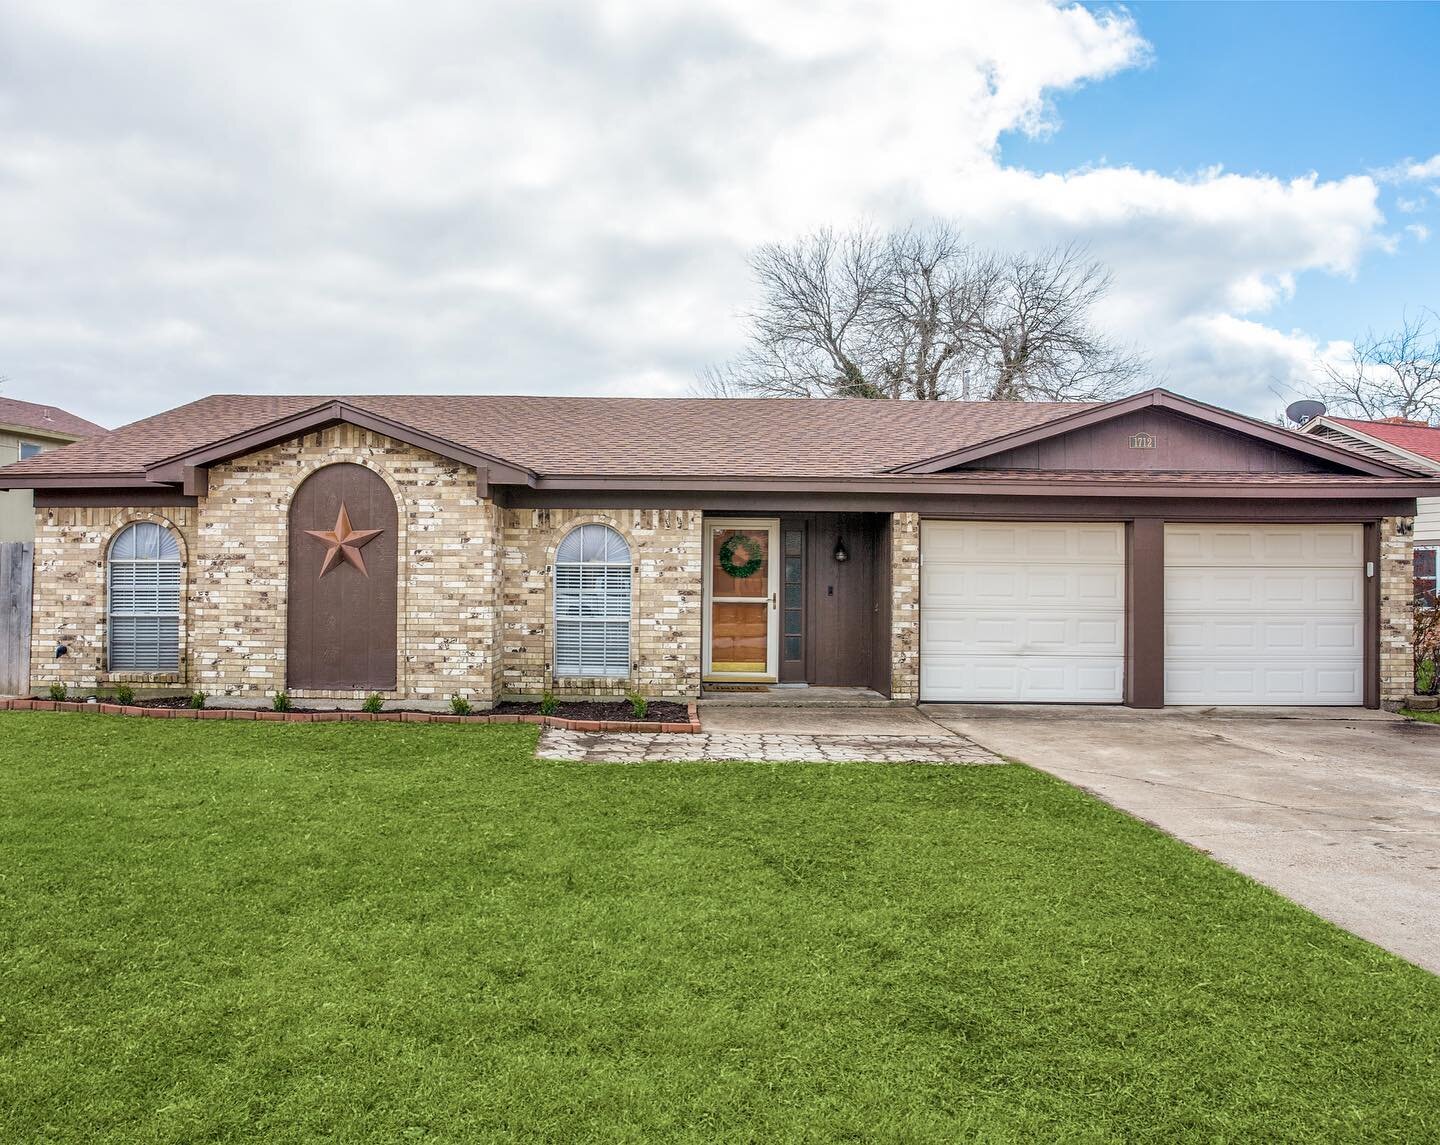 Just Listed in Benbrook! | 1712 S Timber Court | 3 bed | 2 Bath. Wonderfully maintained in established Timber Creek! Enter into the spacious living area with vaulted ceilings accented with wood beams and centered on a wood burning fireplace. Living a